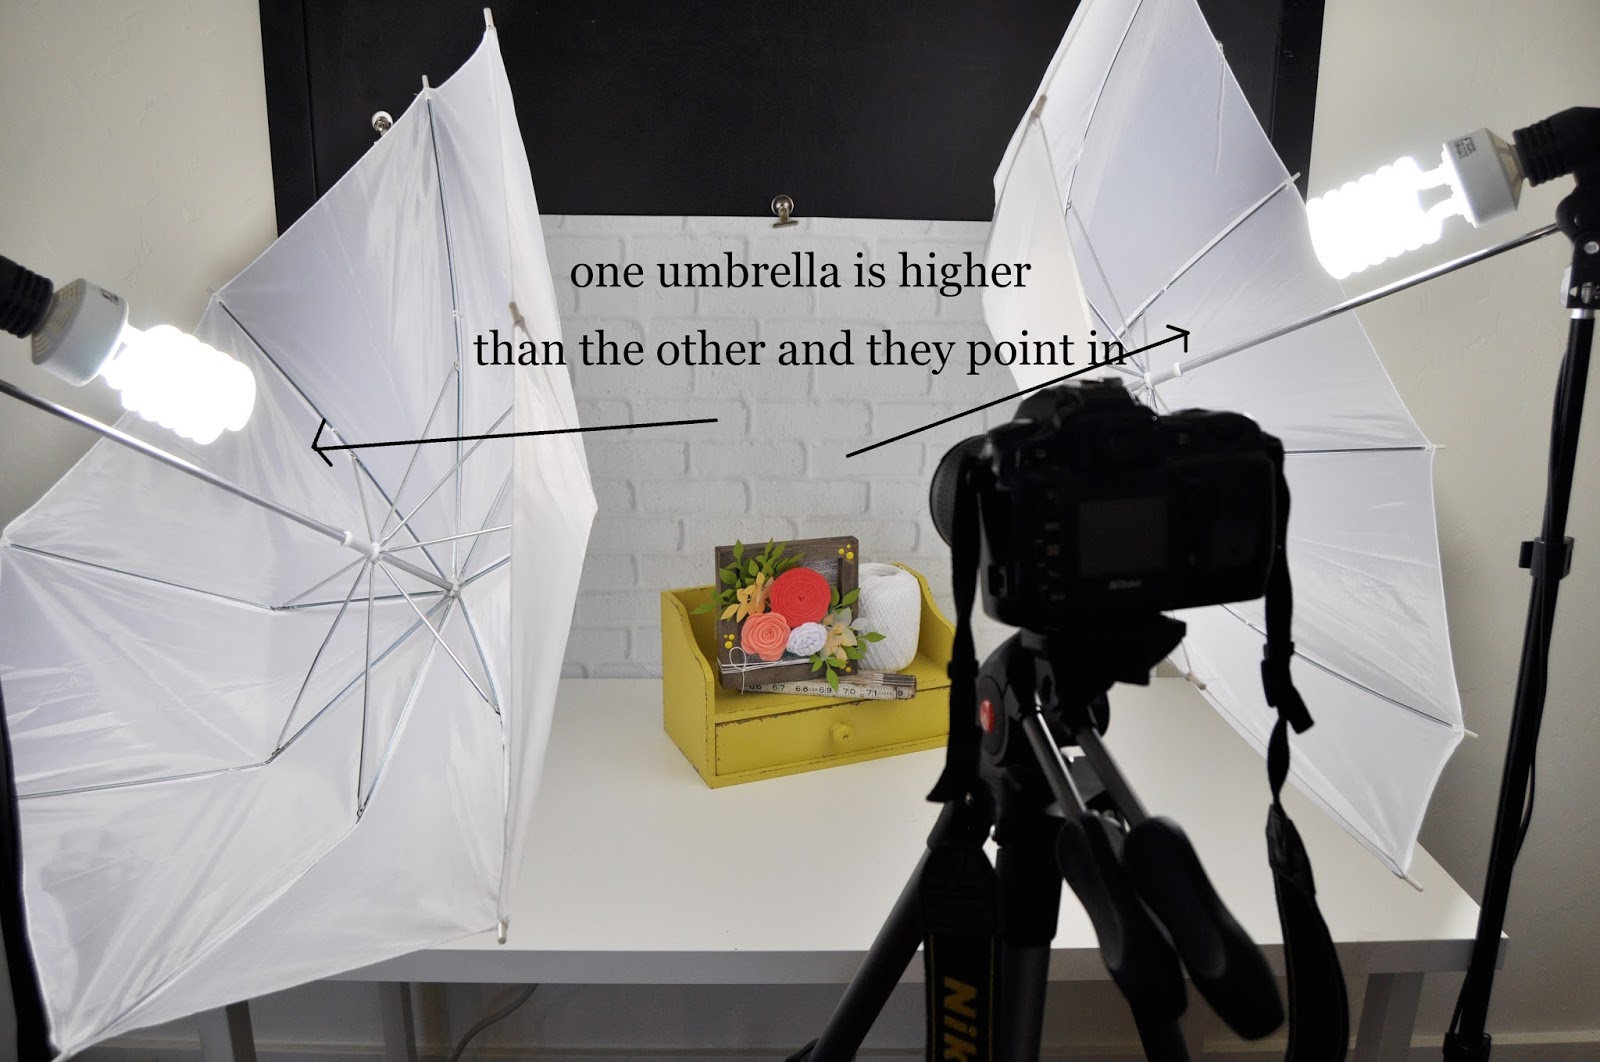 Tips and tricks for staging photos for bloggers and creatives. How to stage blog photography photoshoots with Jen Gallacher. Blogging photography tips. #photography #blogging #jengallacher